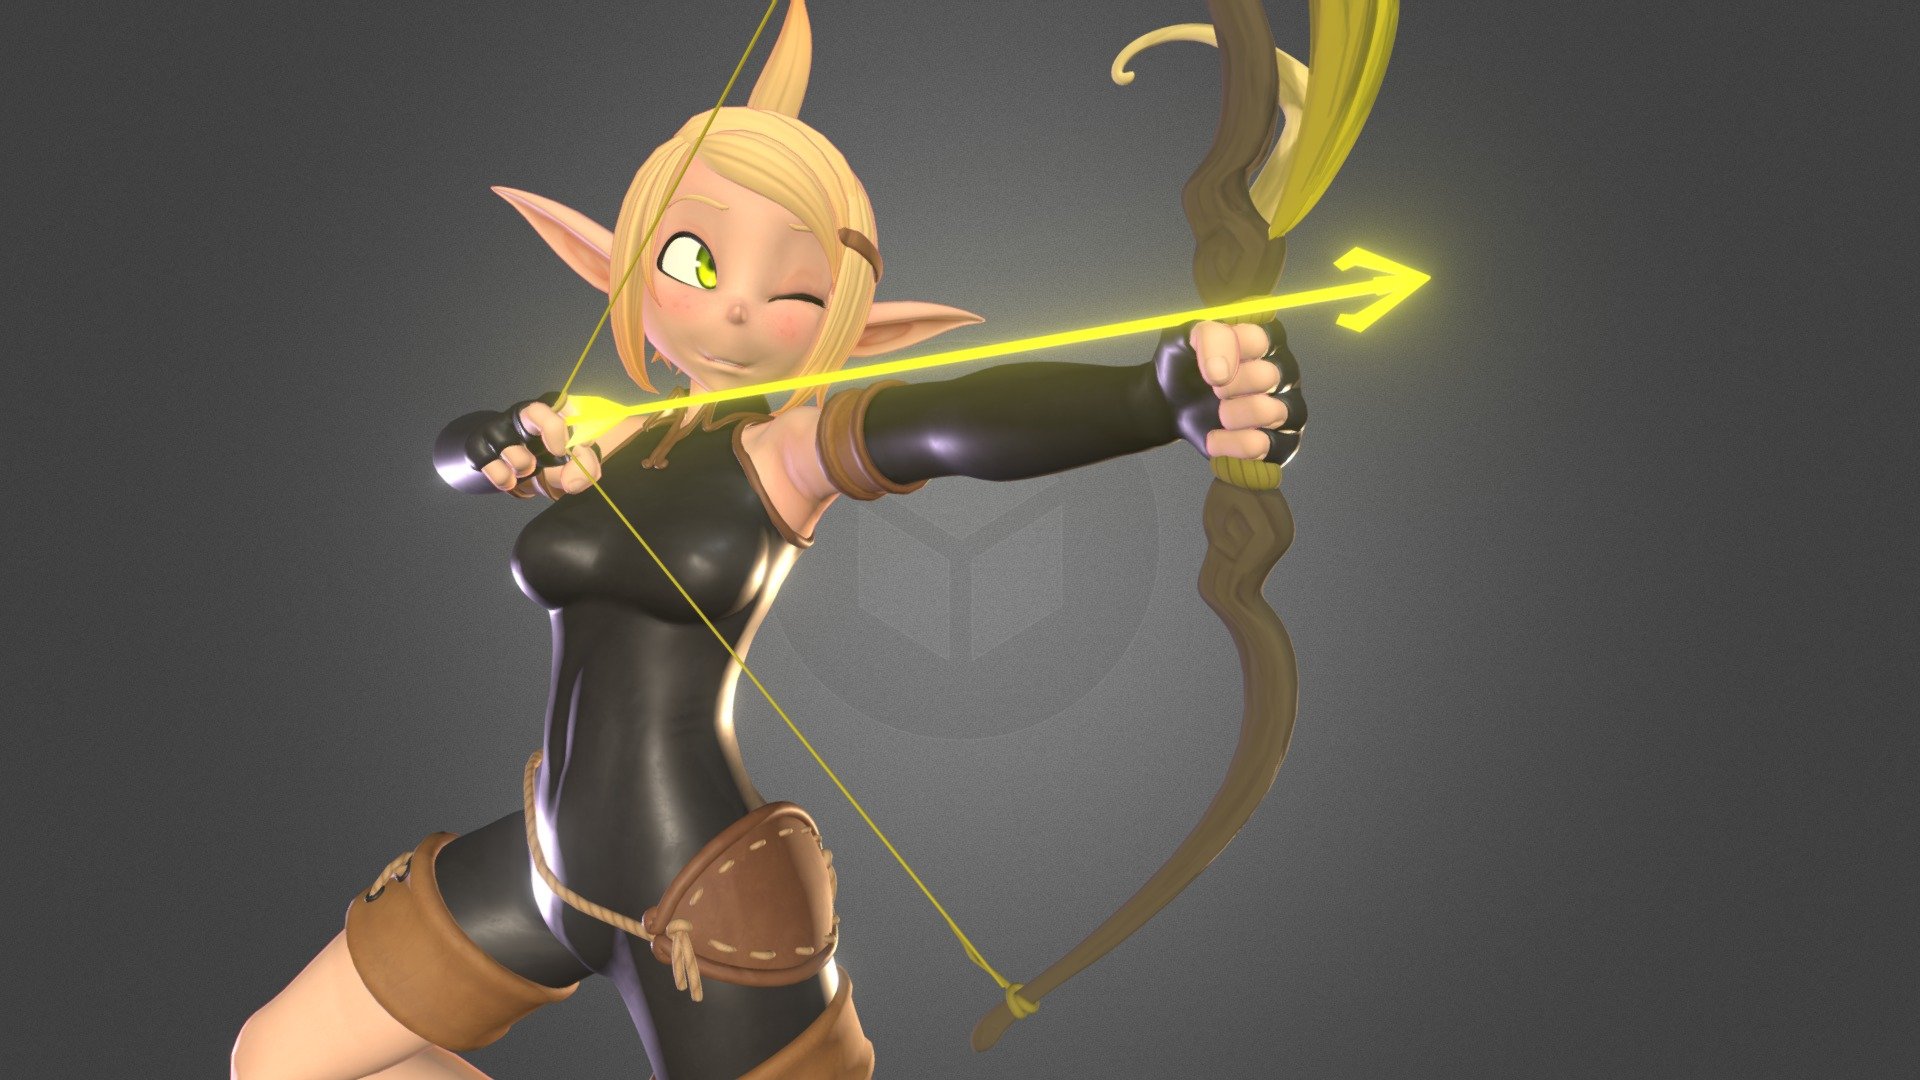 Poseable Blend file is available here https://shorturl.at/rwHL6

This is Evangelyne from season 2 of Wakfu rocking her OG hairstyle 3d model